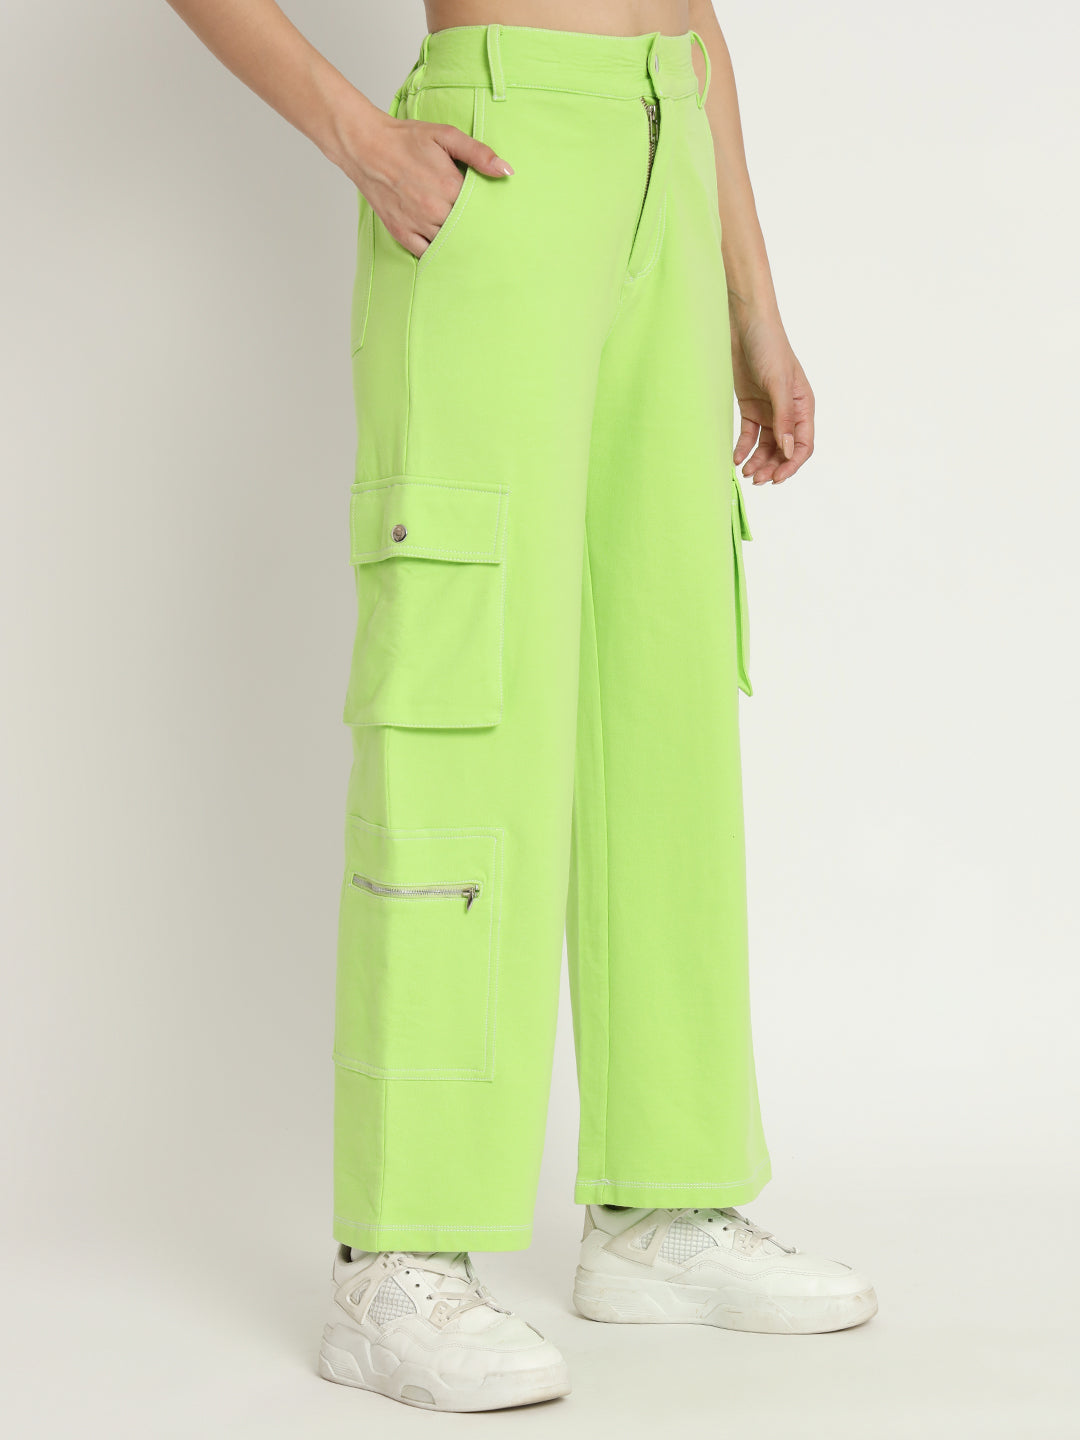 Wide leg satin pants in lime green - Himelhoch's Department Store